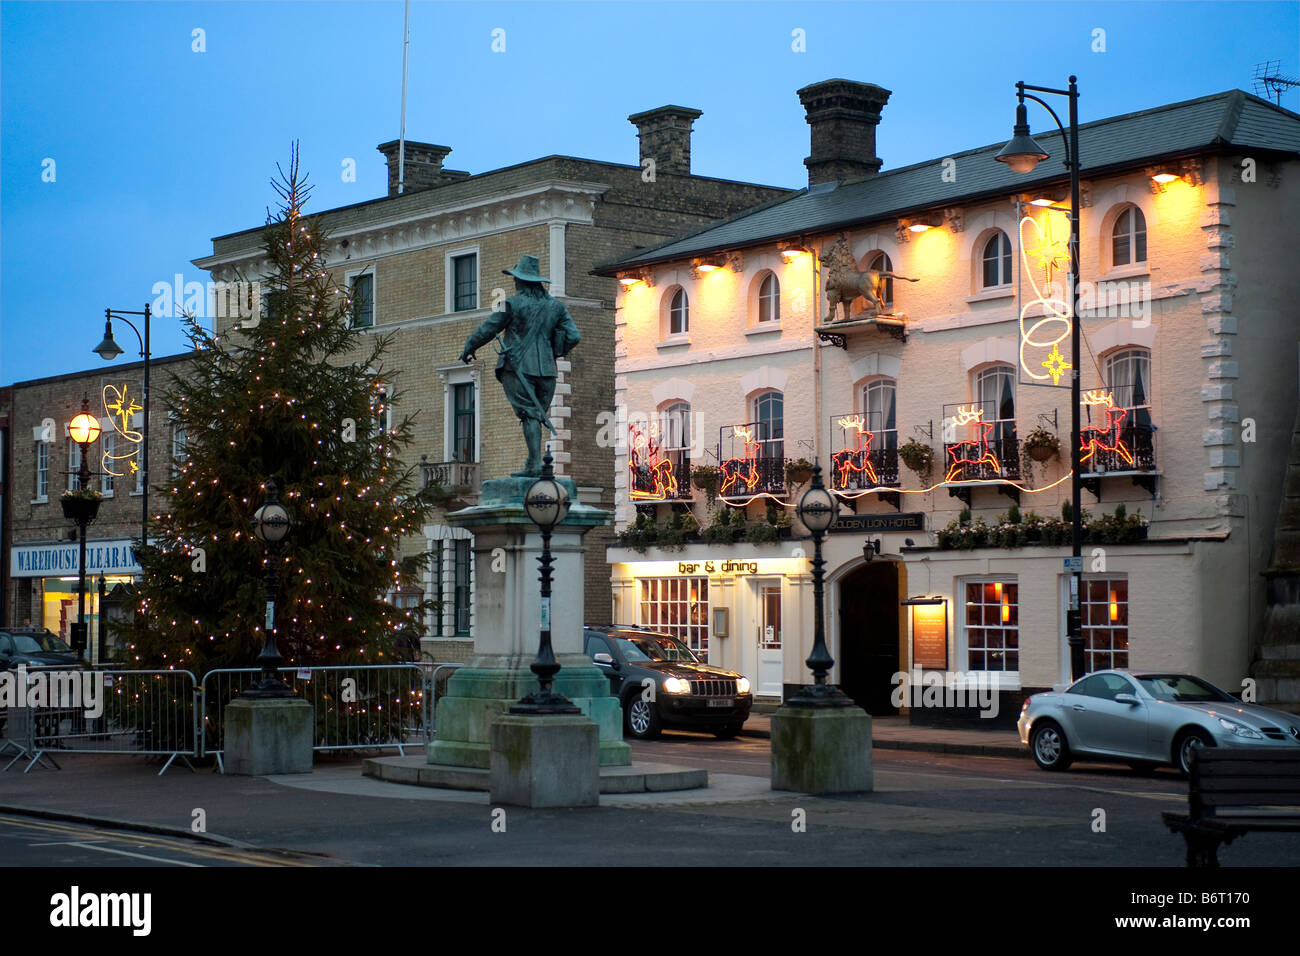 Dusk in St Ives Golden Lion Town Hall Christmas Tree and statue of Oliver Cromwell on Market Hill Stock Photo